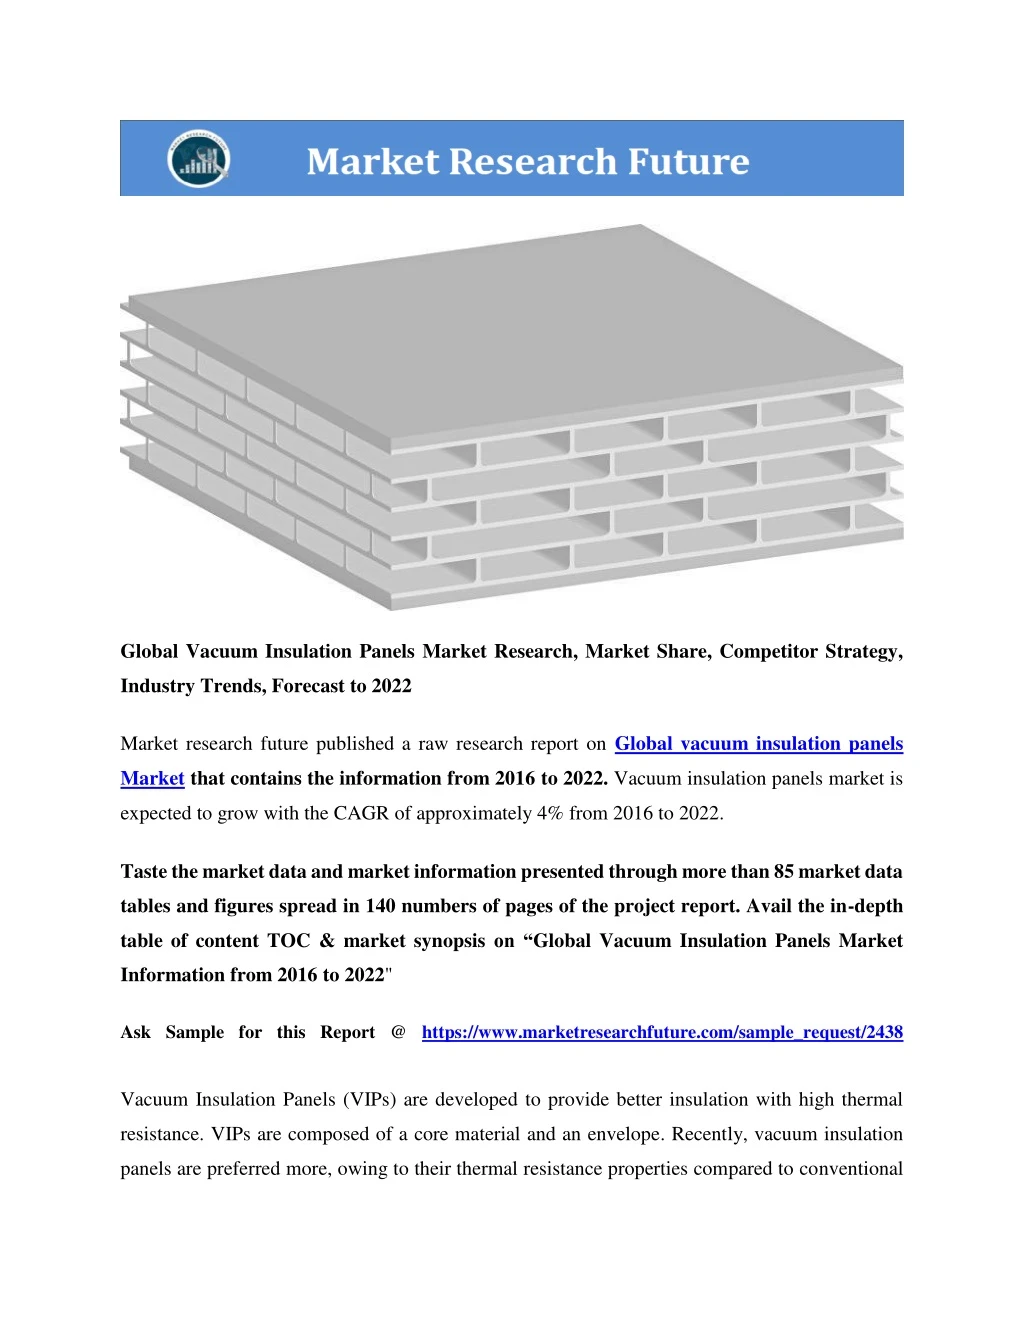 global vacuum insulation panels market research